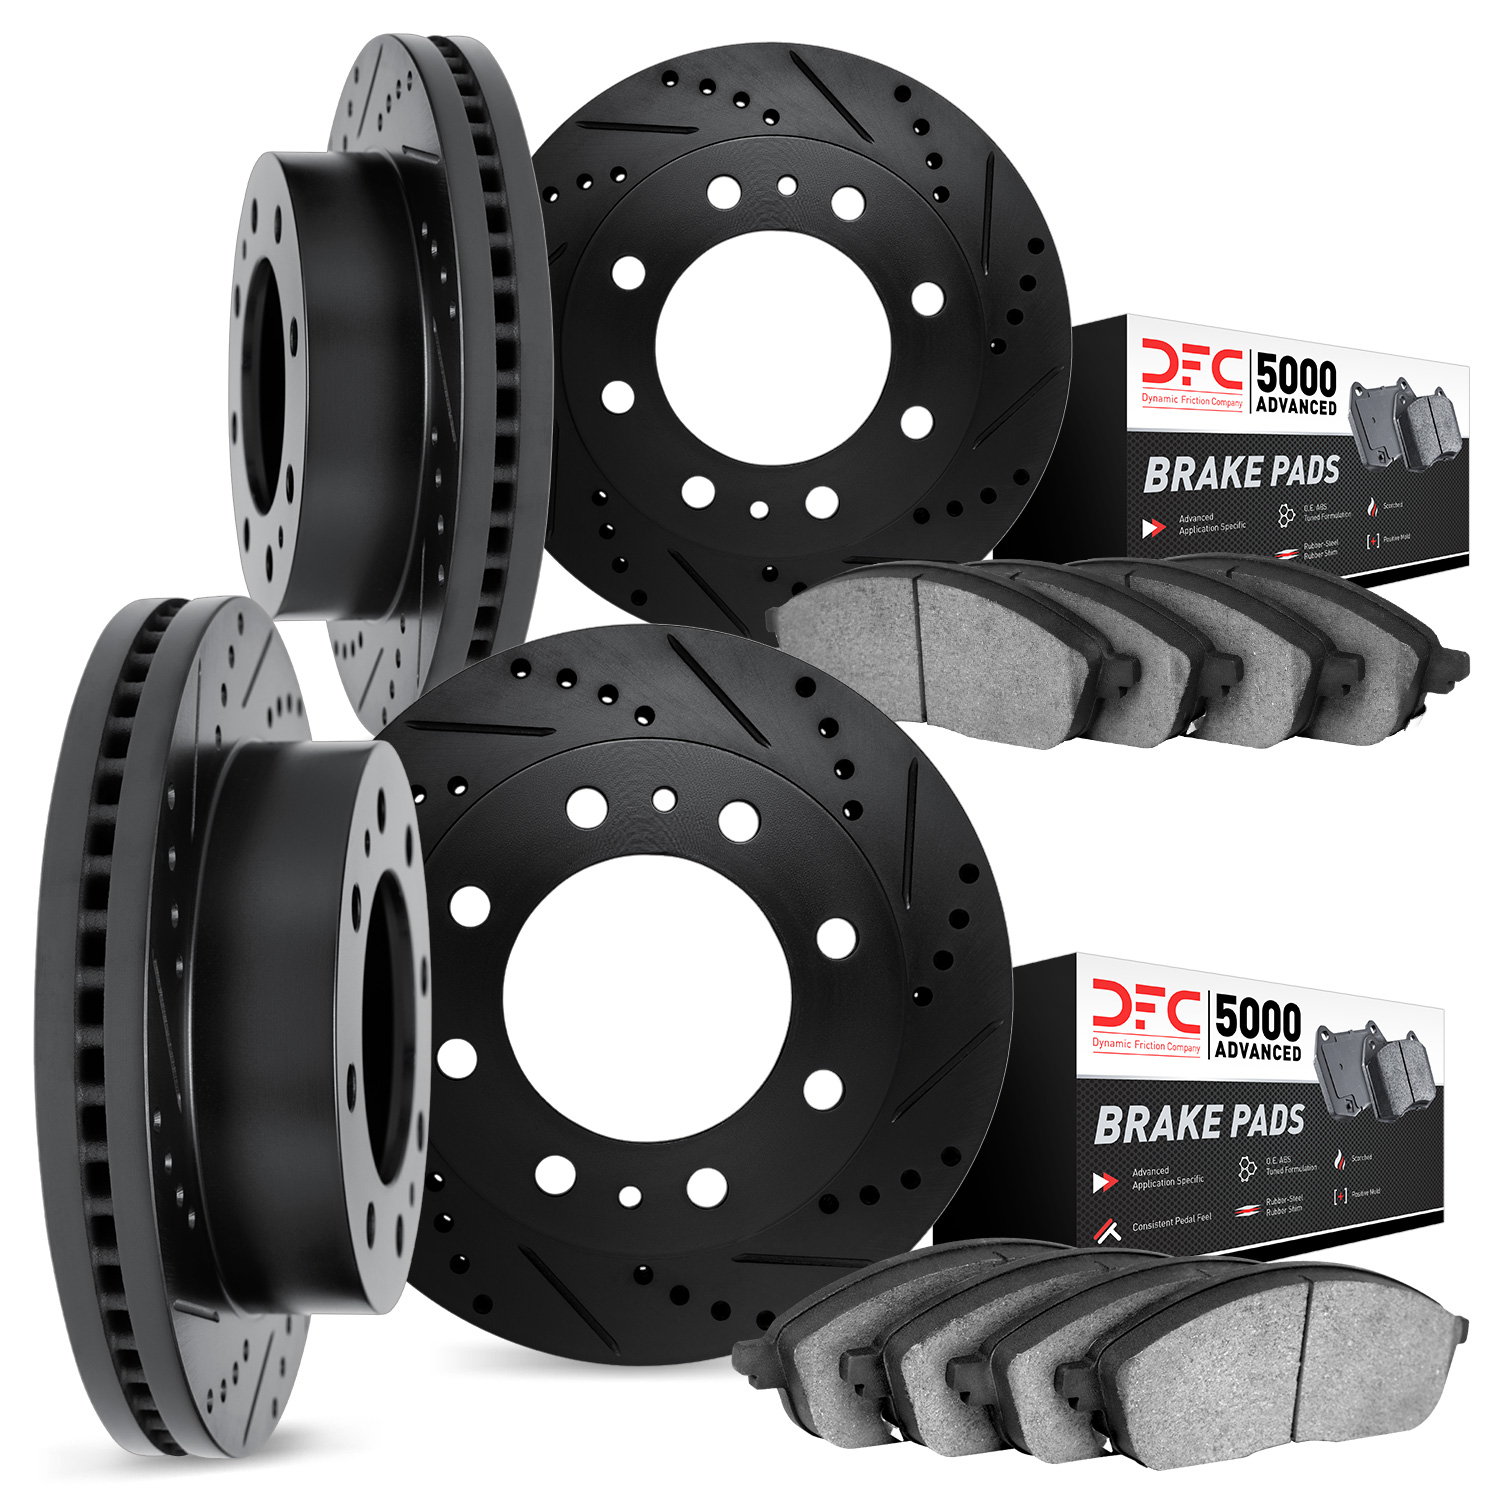 8504-48031 Drilled/Slotted Brake Rotors w/5000 Advanced Brake Pads Kit [Black], 2001-2010 GM, Position: Front and Rear